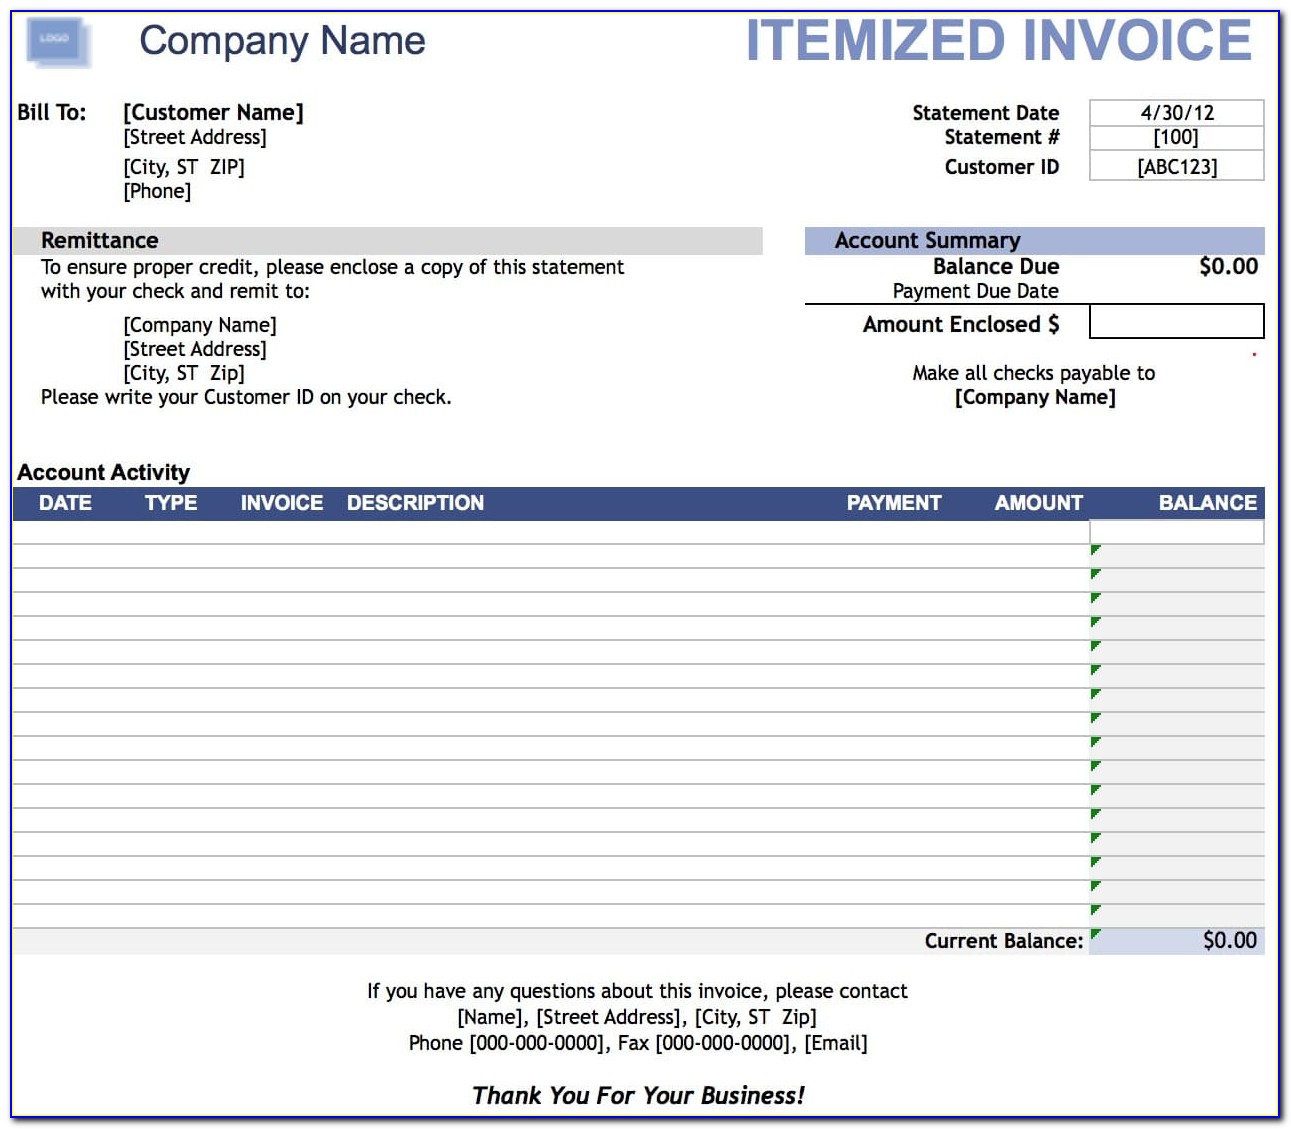 Itemized Invoice Template Word